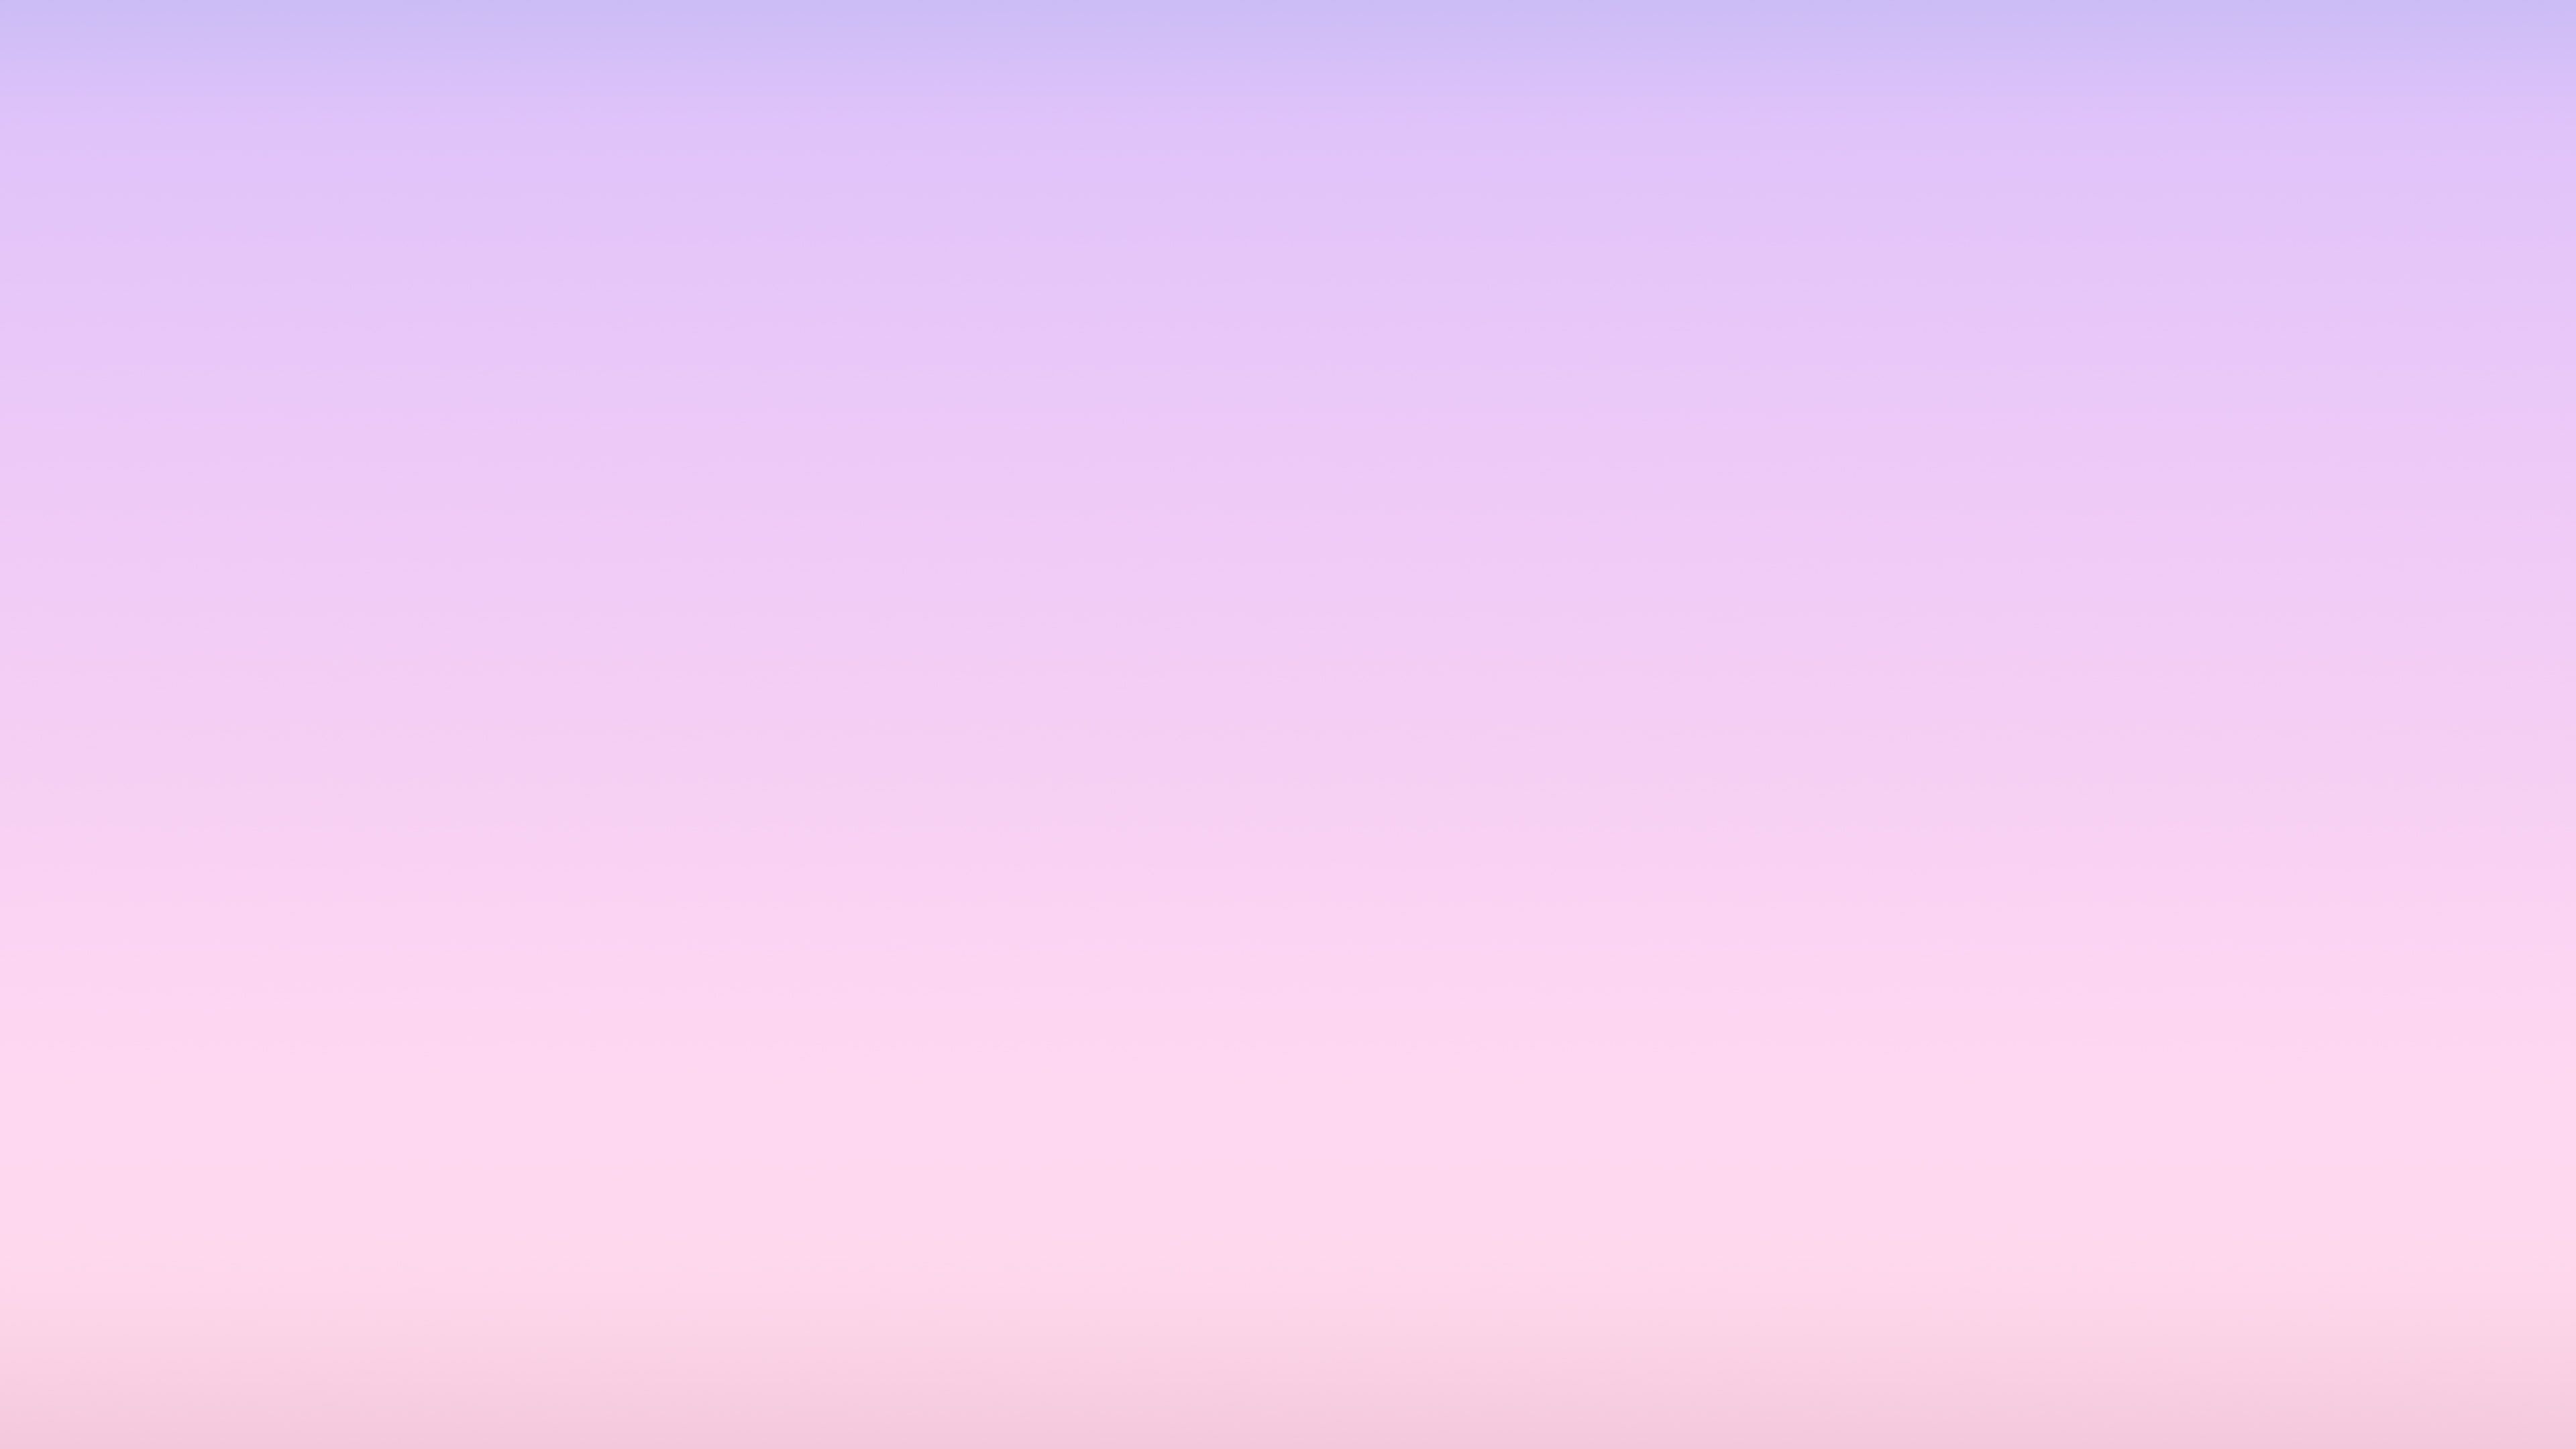 Pastel Colors, Gradient wallpapers, Serene and calm, Ethereal beauty, 3840x2160 4K Desktop